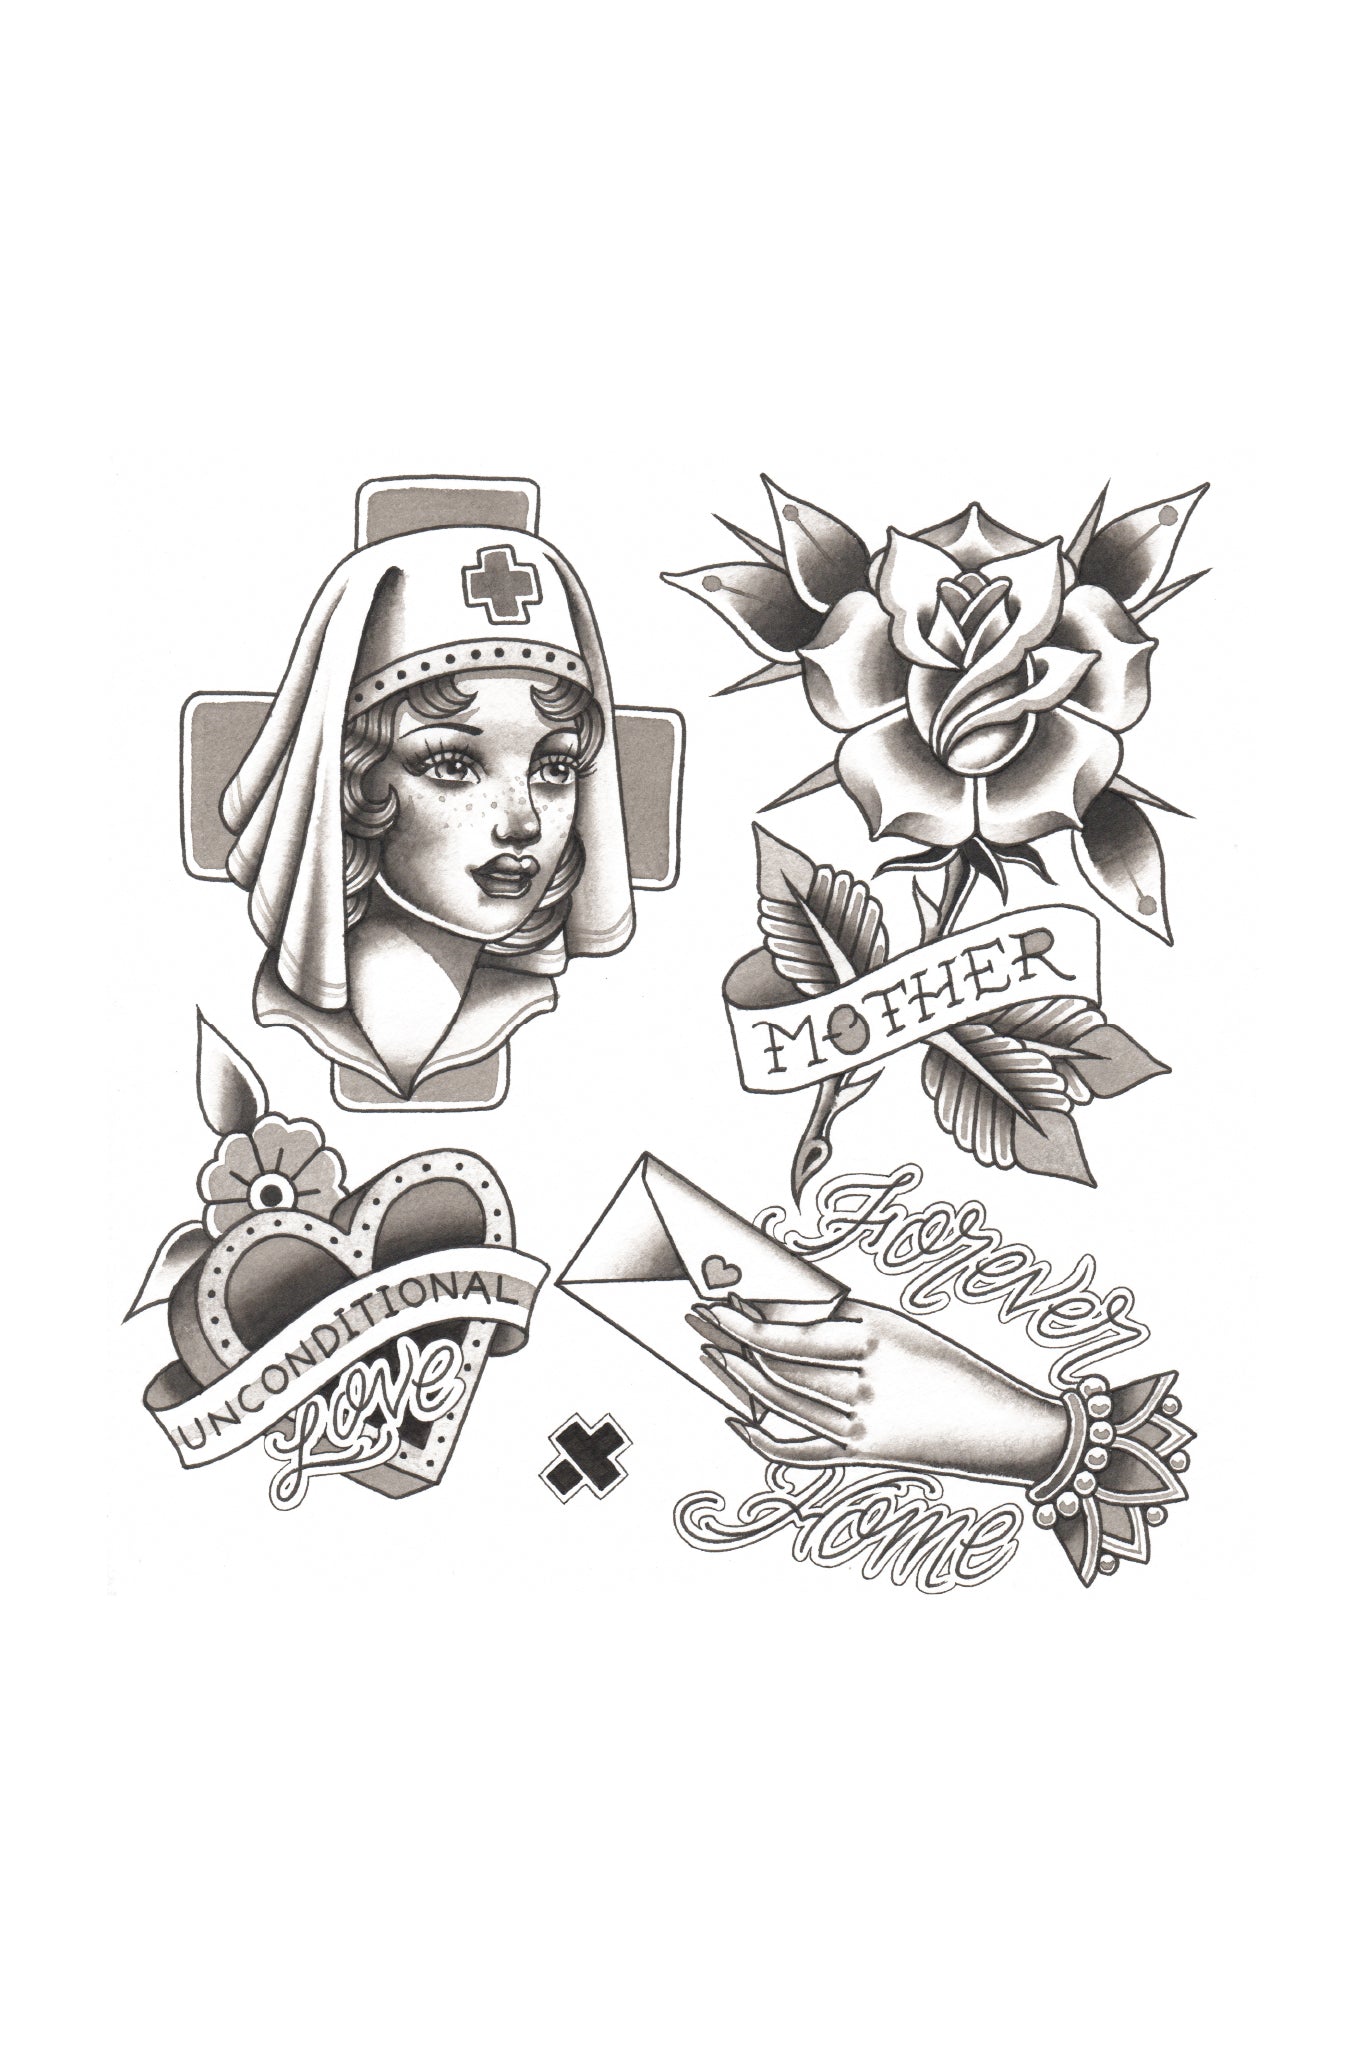 Full design of the Mother's Flash sheet. Cut the tattoos out and place them where you prefer.